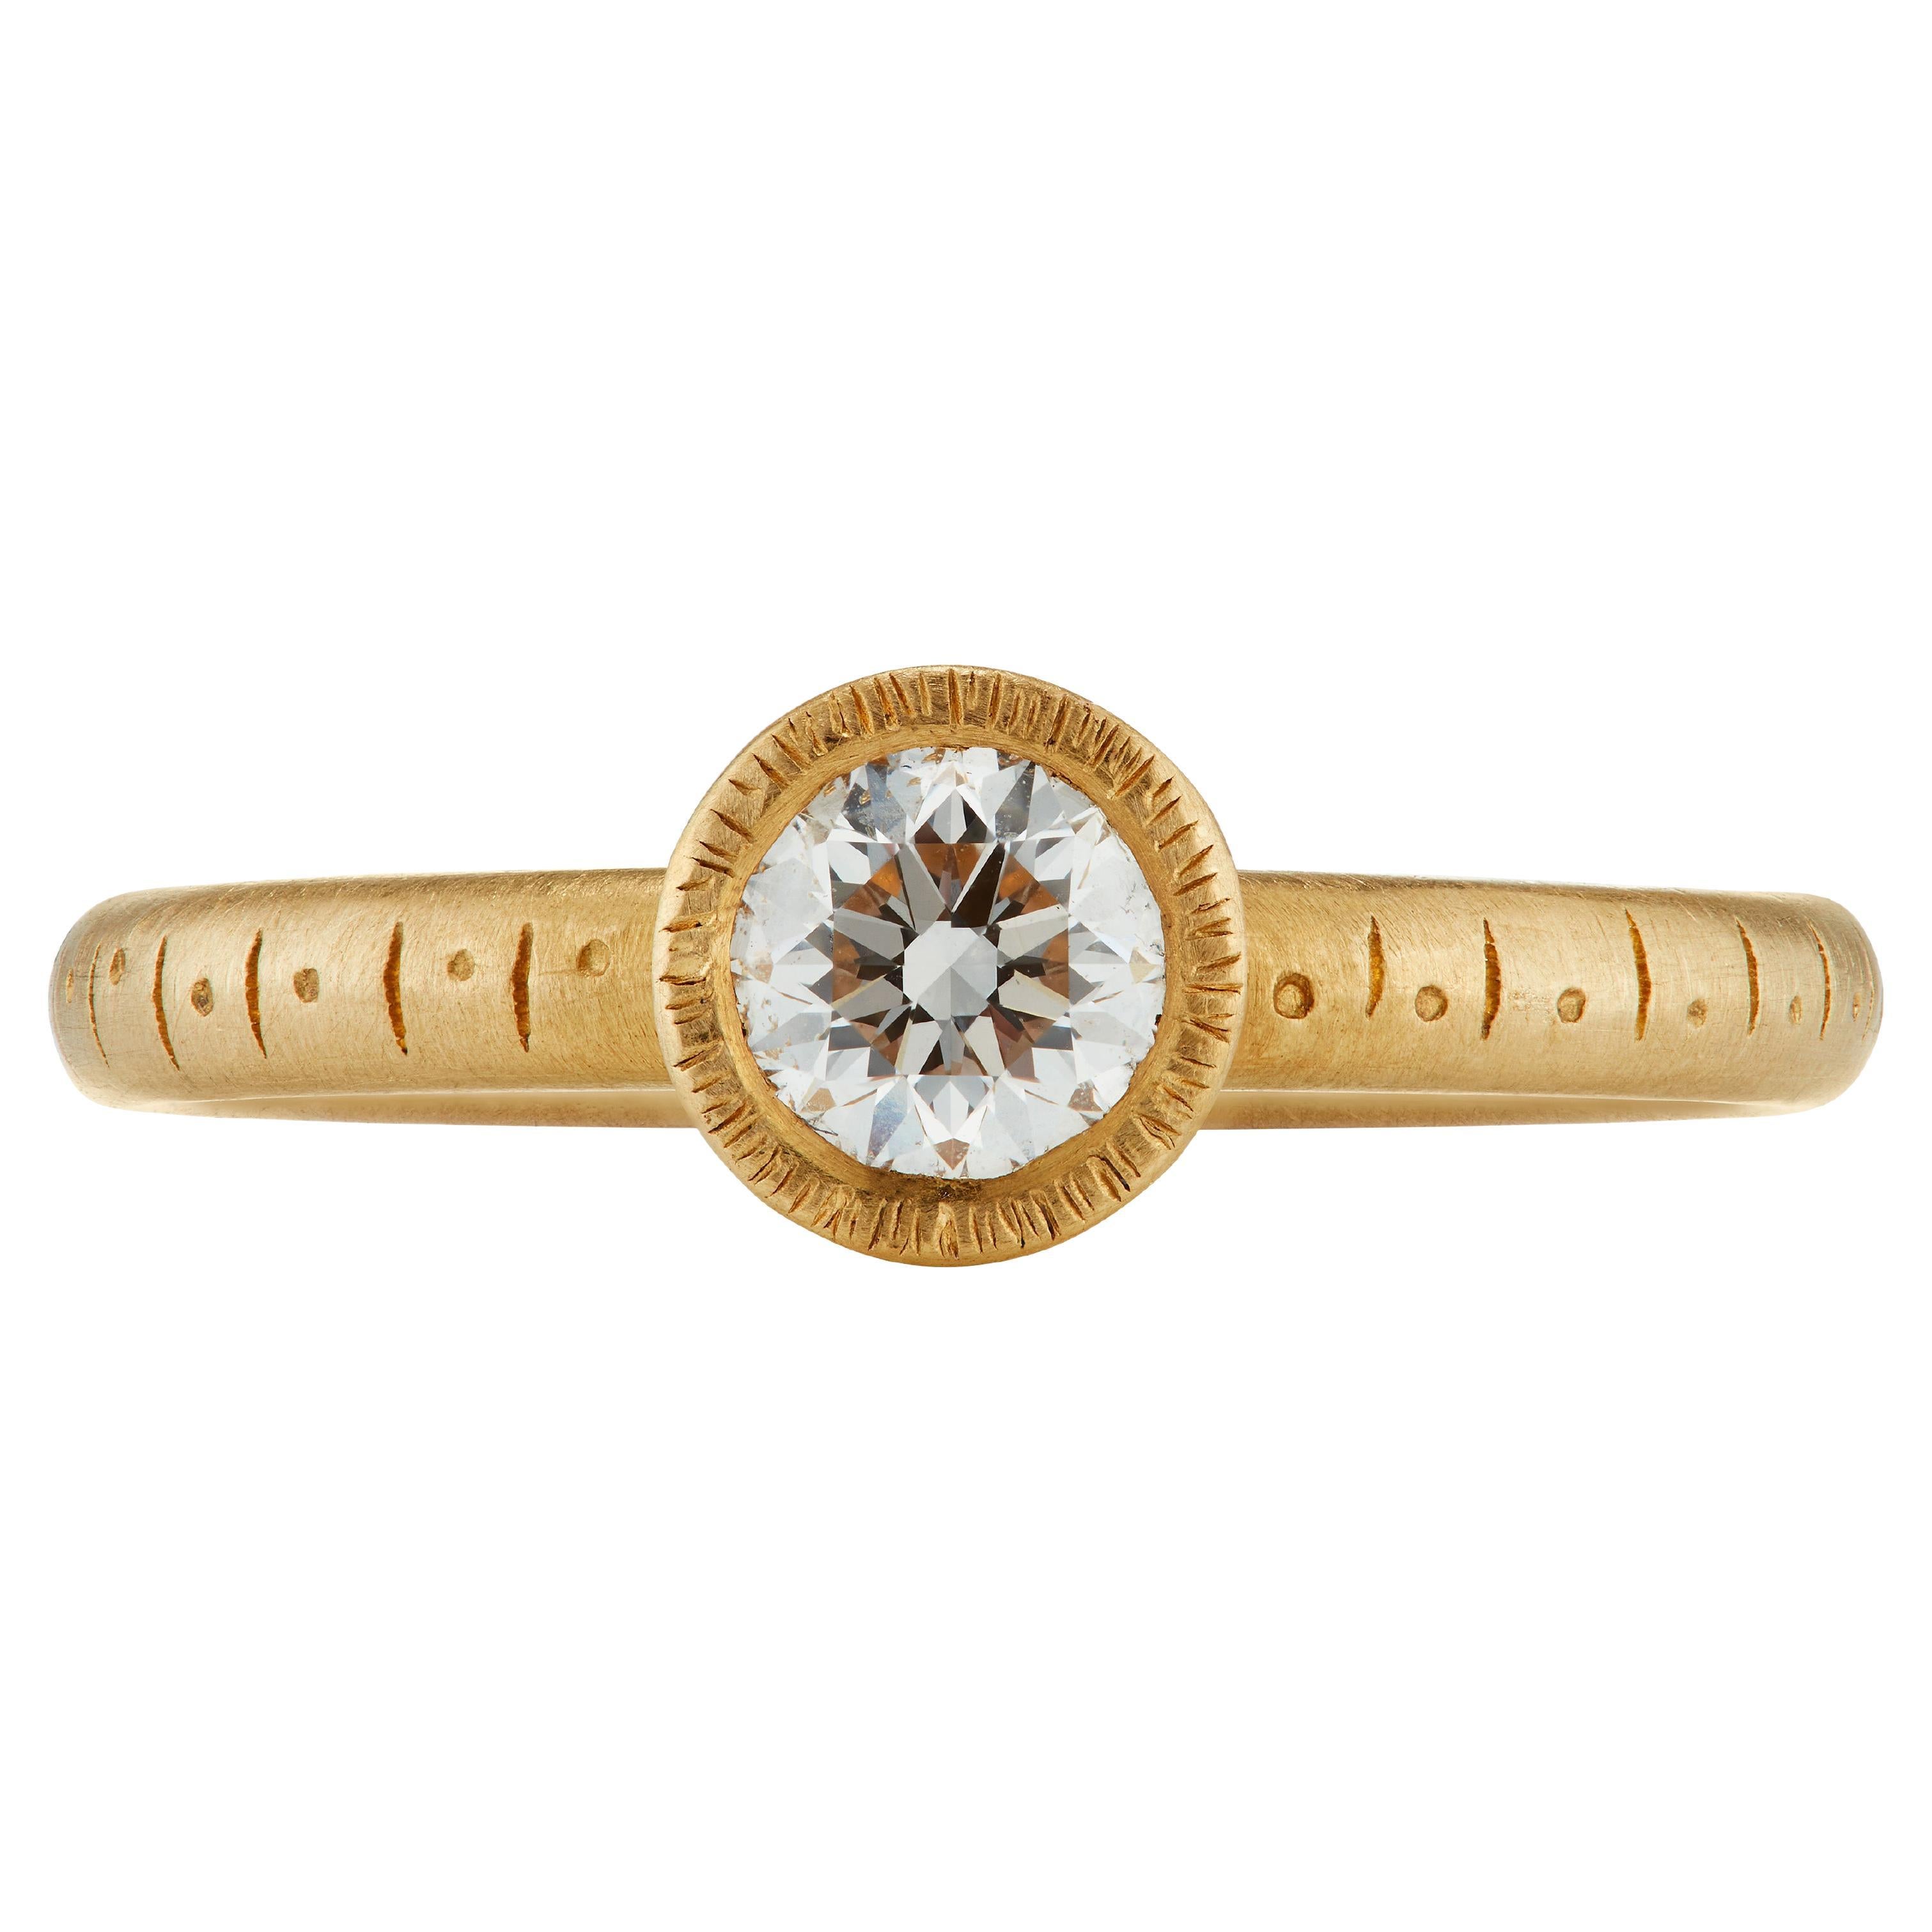 For Sale:  The Callie Ethical Engagement Ring CanadaMark 0.4 carat Diamond 18ct Gold